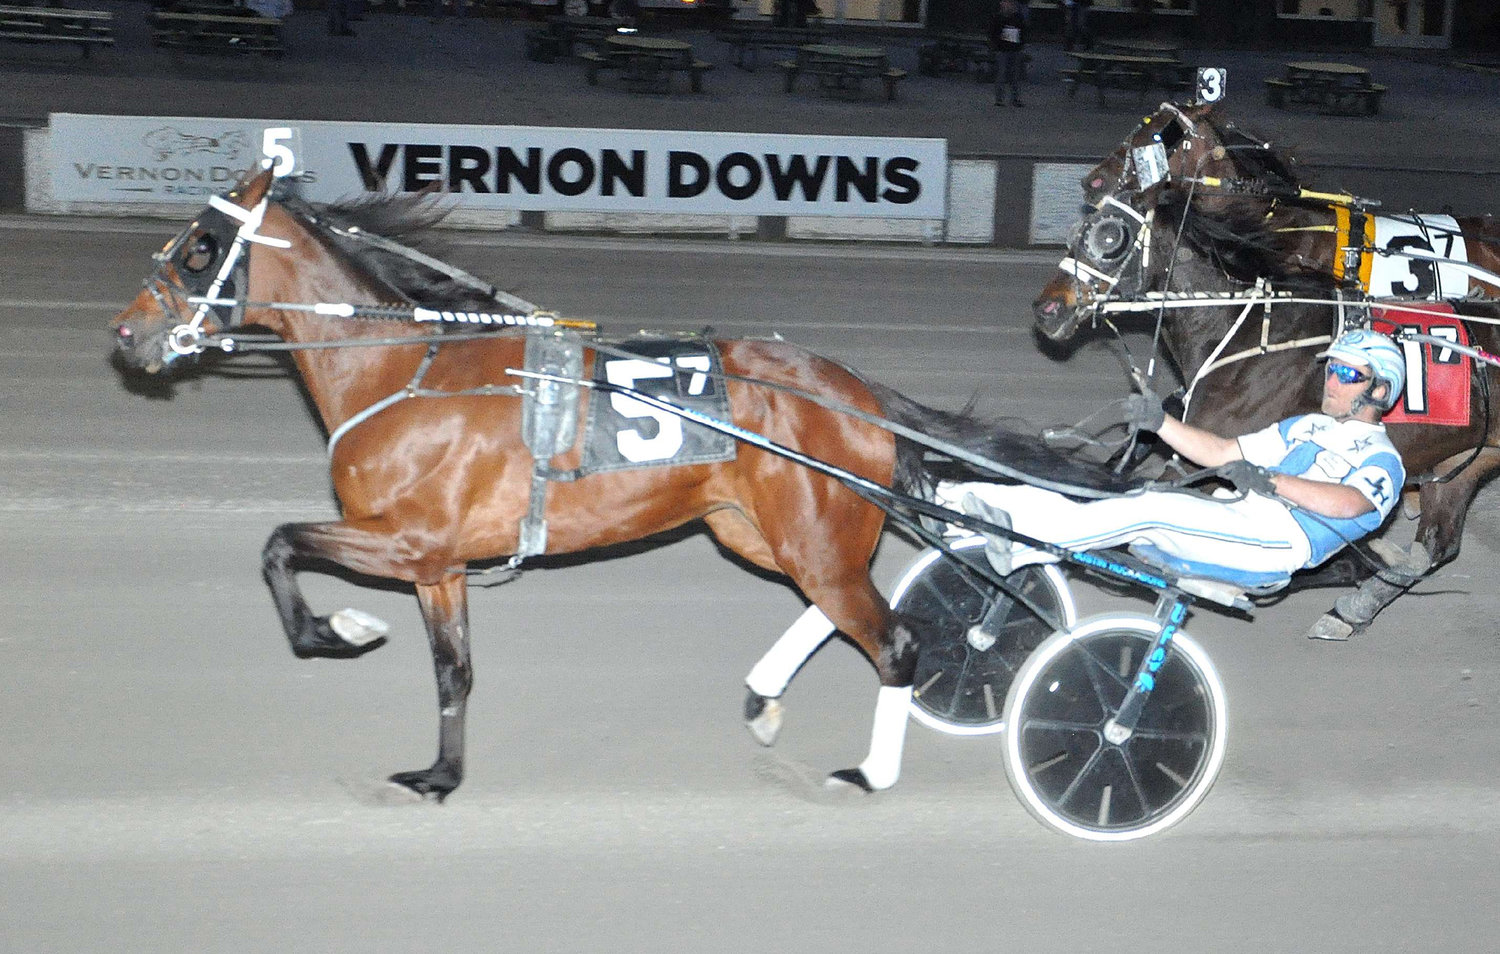 Justin Huckabone steered Credit List ($4.20) to a victory in the $7,000 Open Trot.